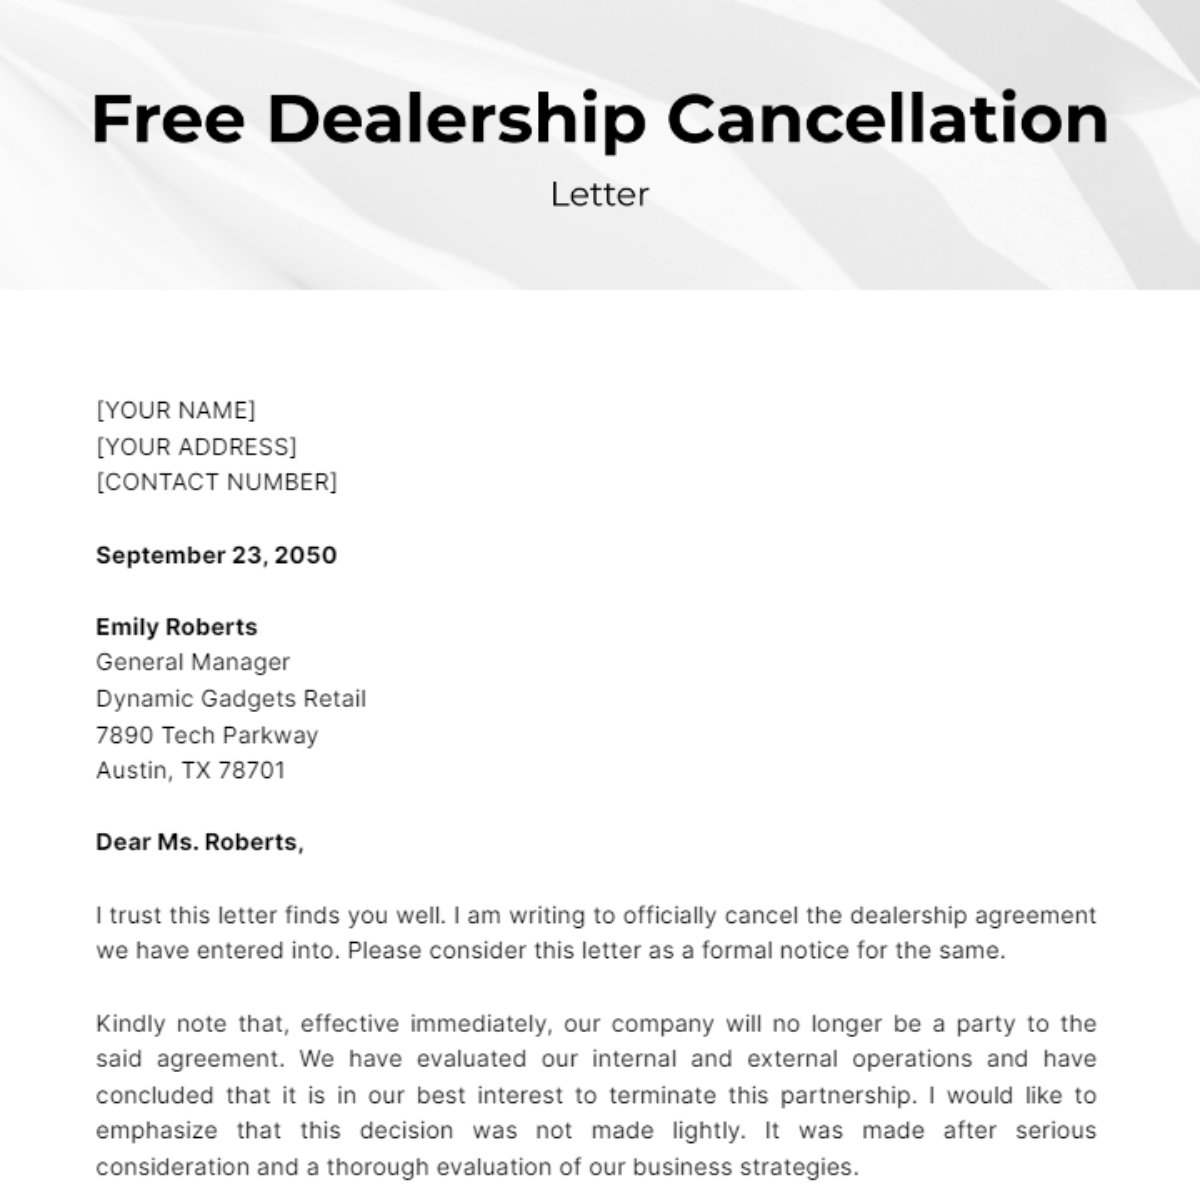 Dealership Cancellation Letter Template